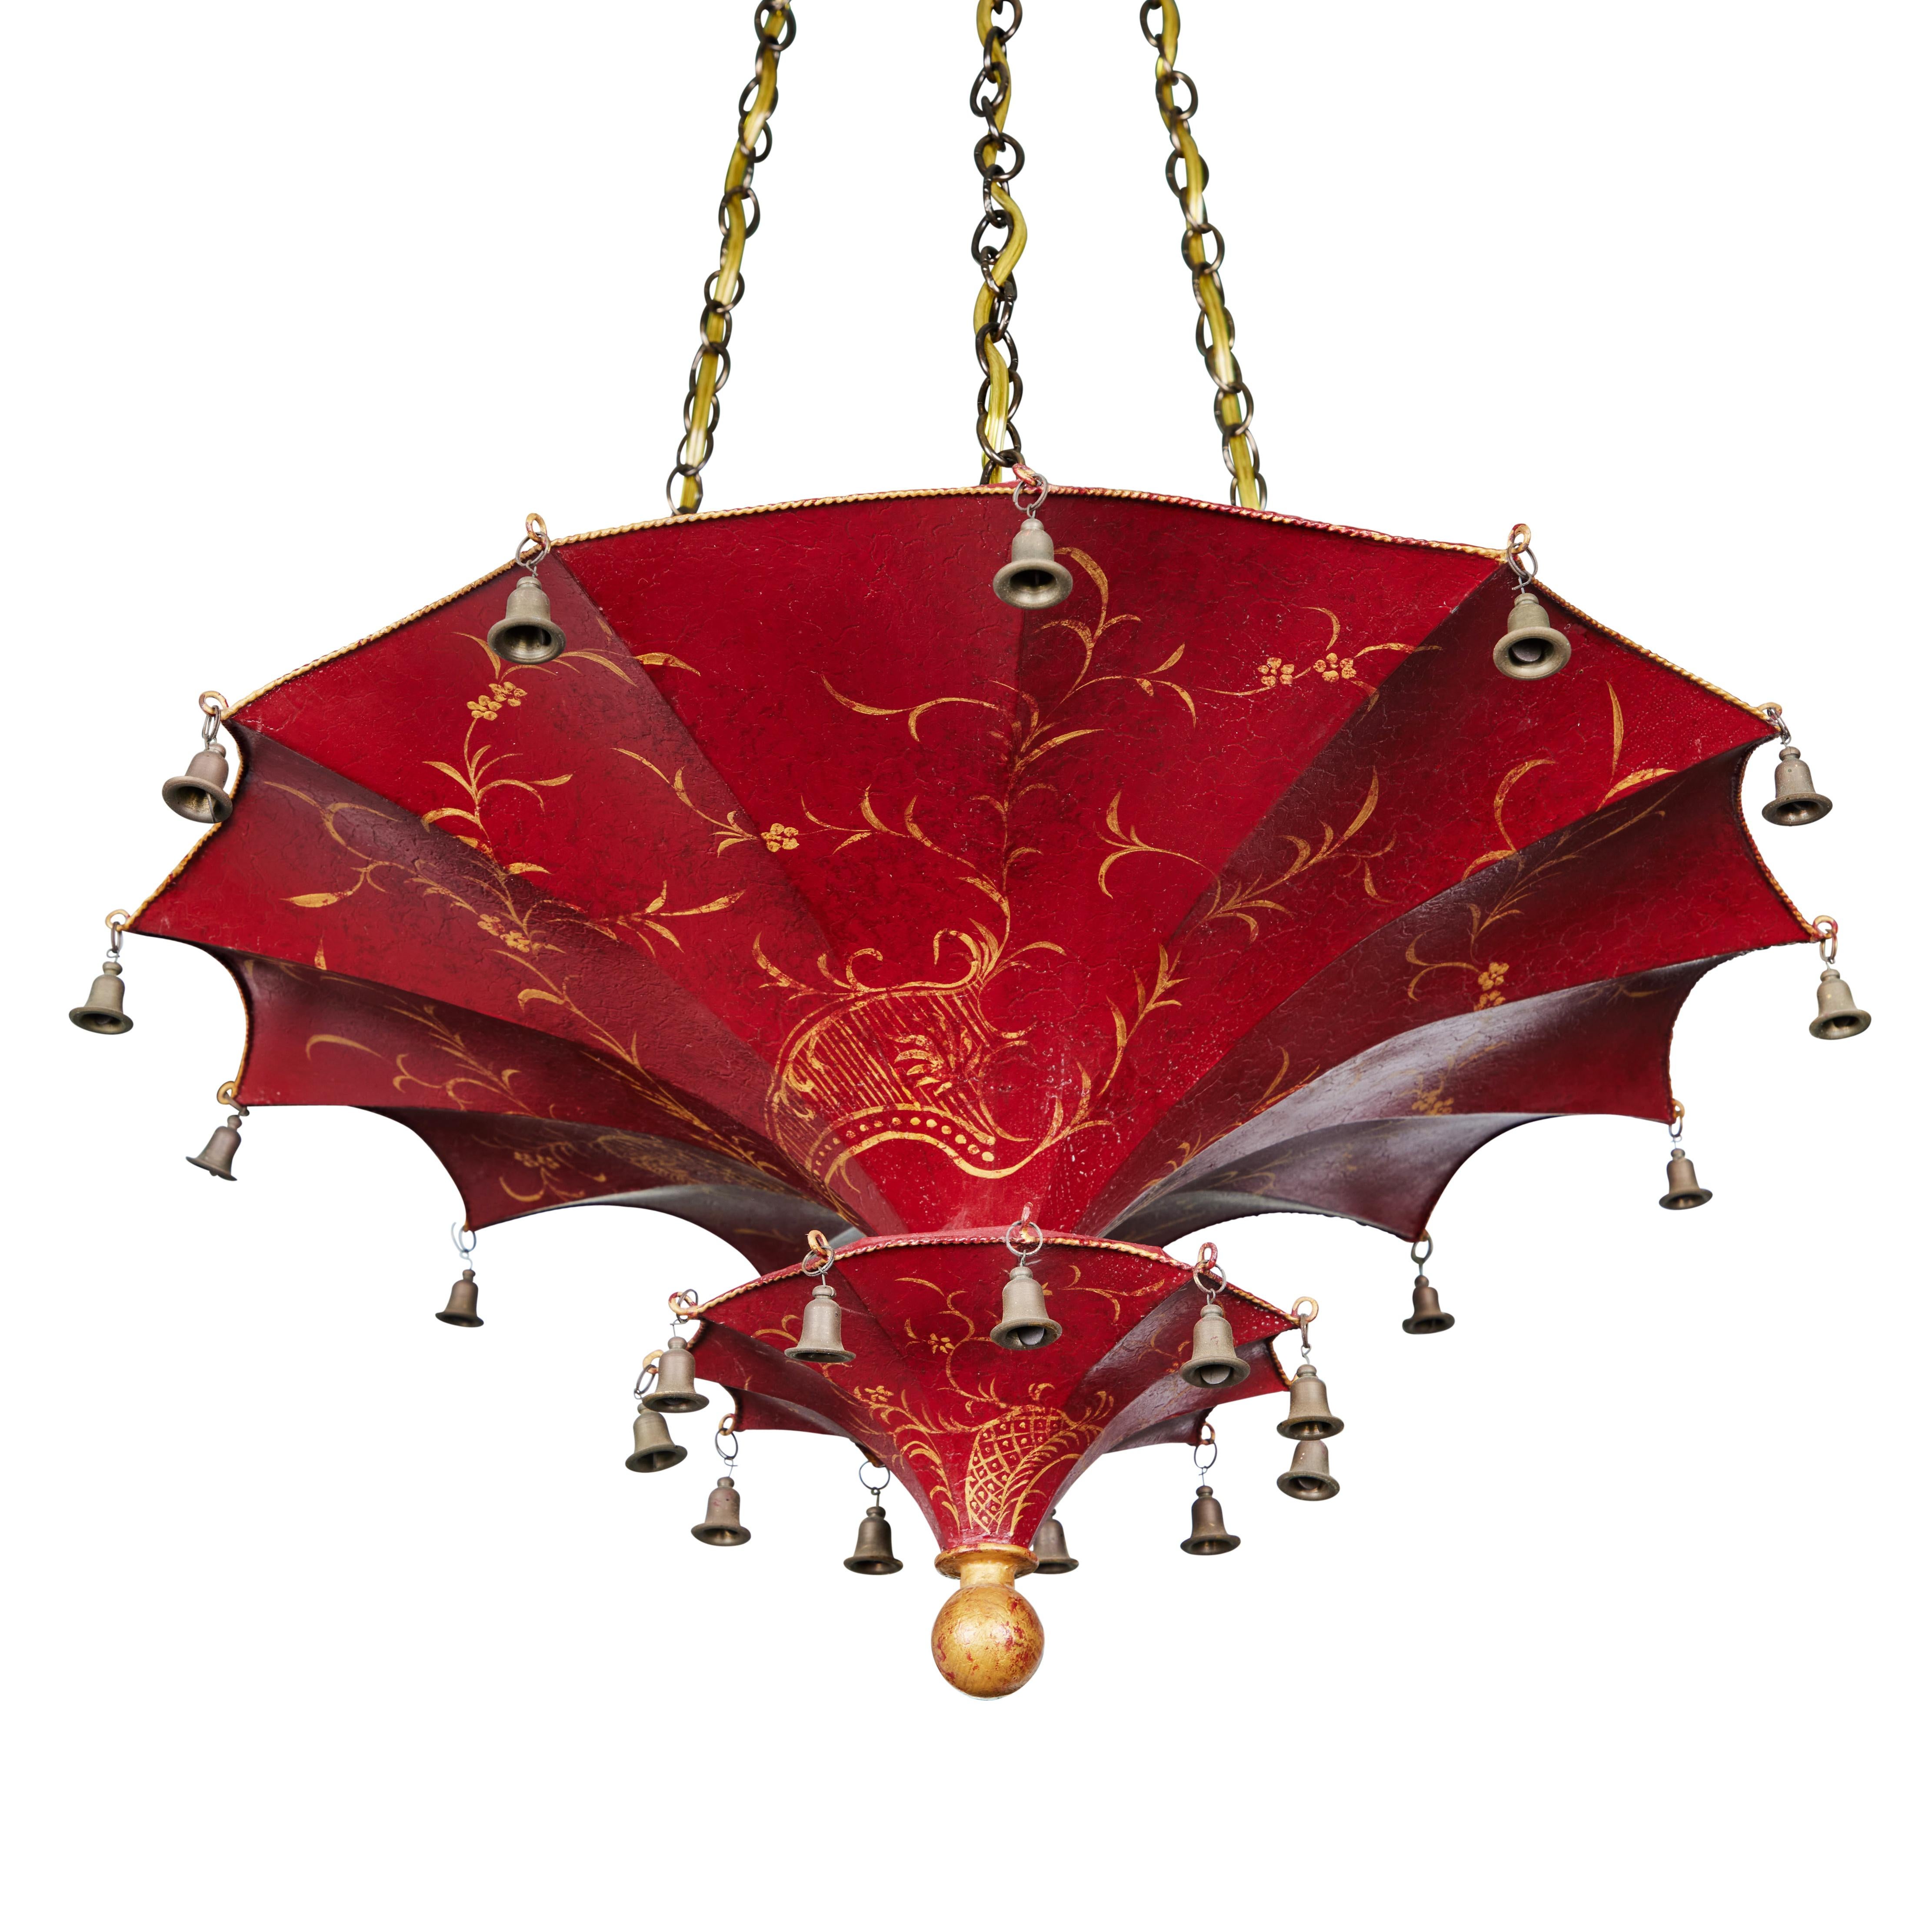 Chinese red Pagoda style four-light hanging light fixture by John Rosselli, 20th century. Newly rewired.
 